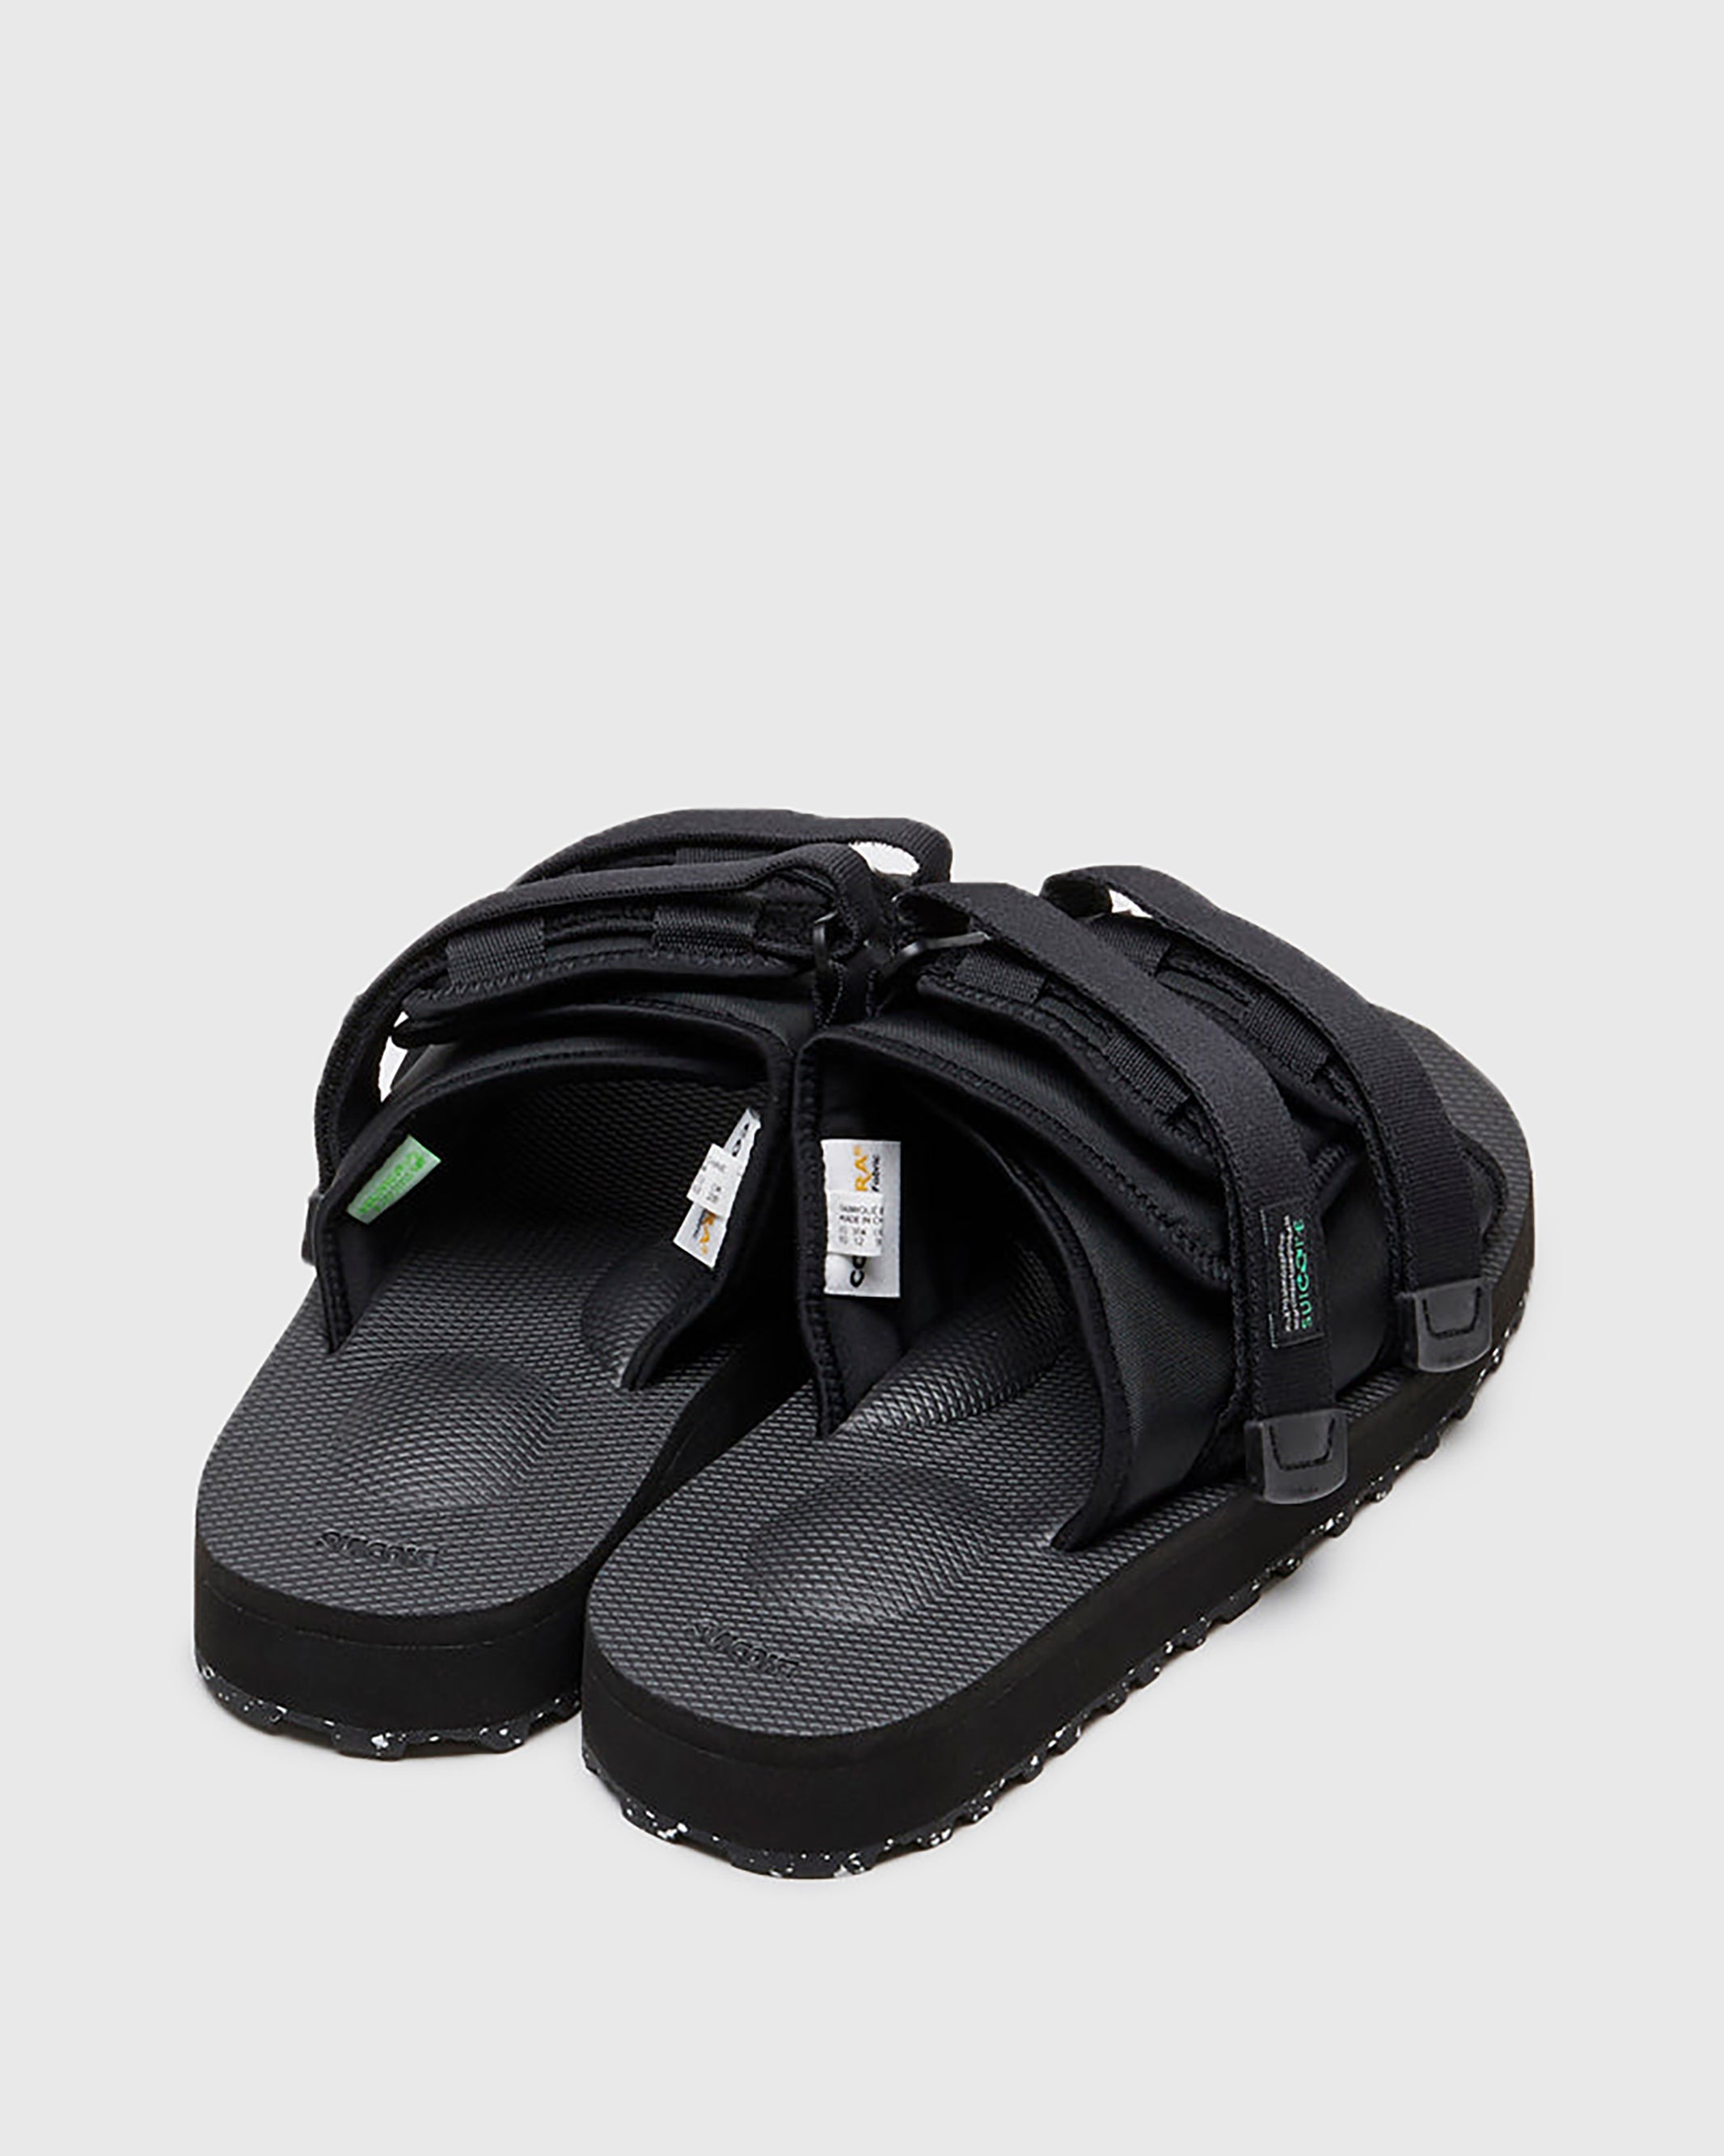 SUICOKE MOTO-Cab-ECO in Black OG-056CAB-ECO | Shop from eightywingold an official brand partner for SUICOKE Canada and US.